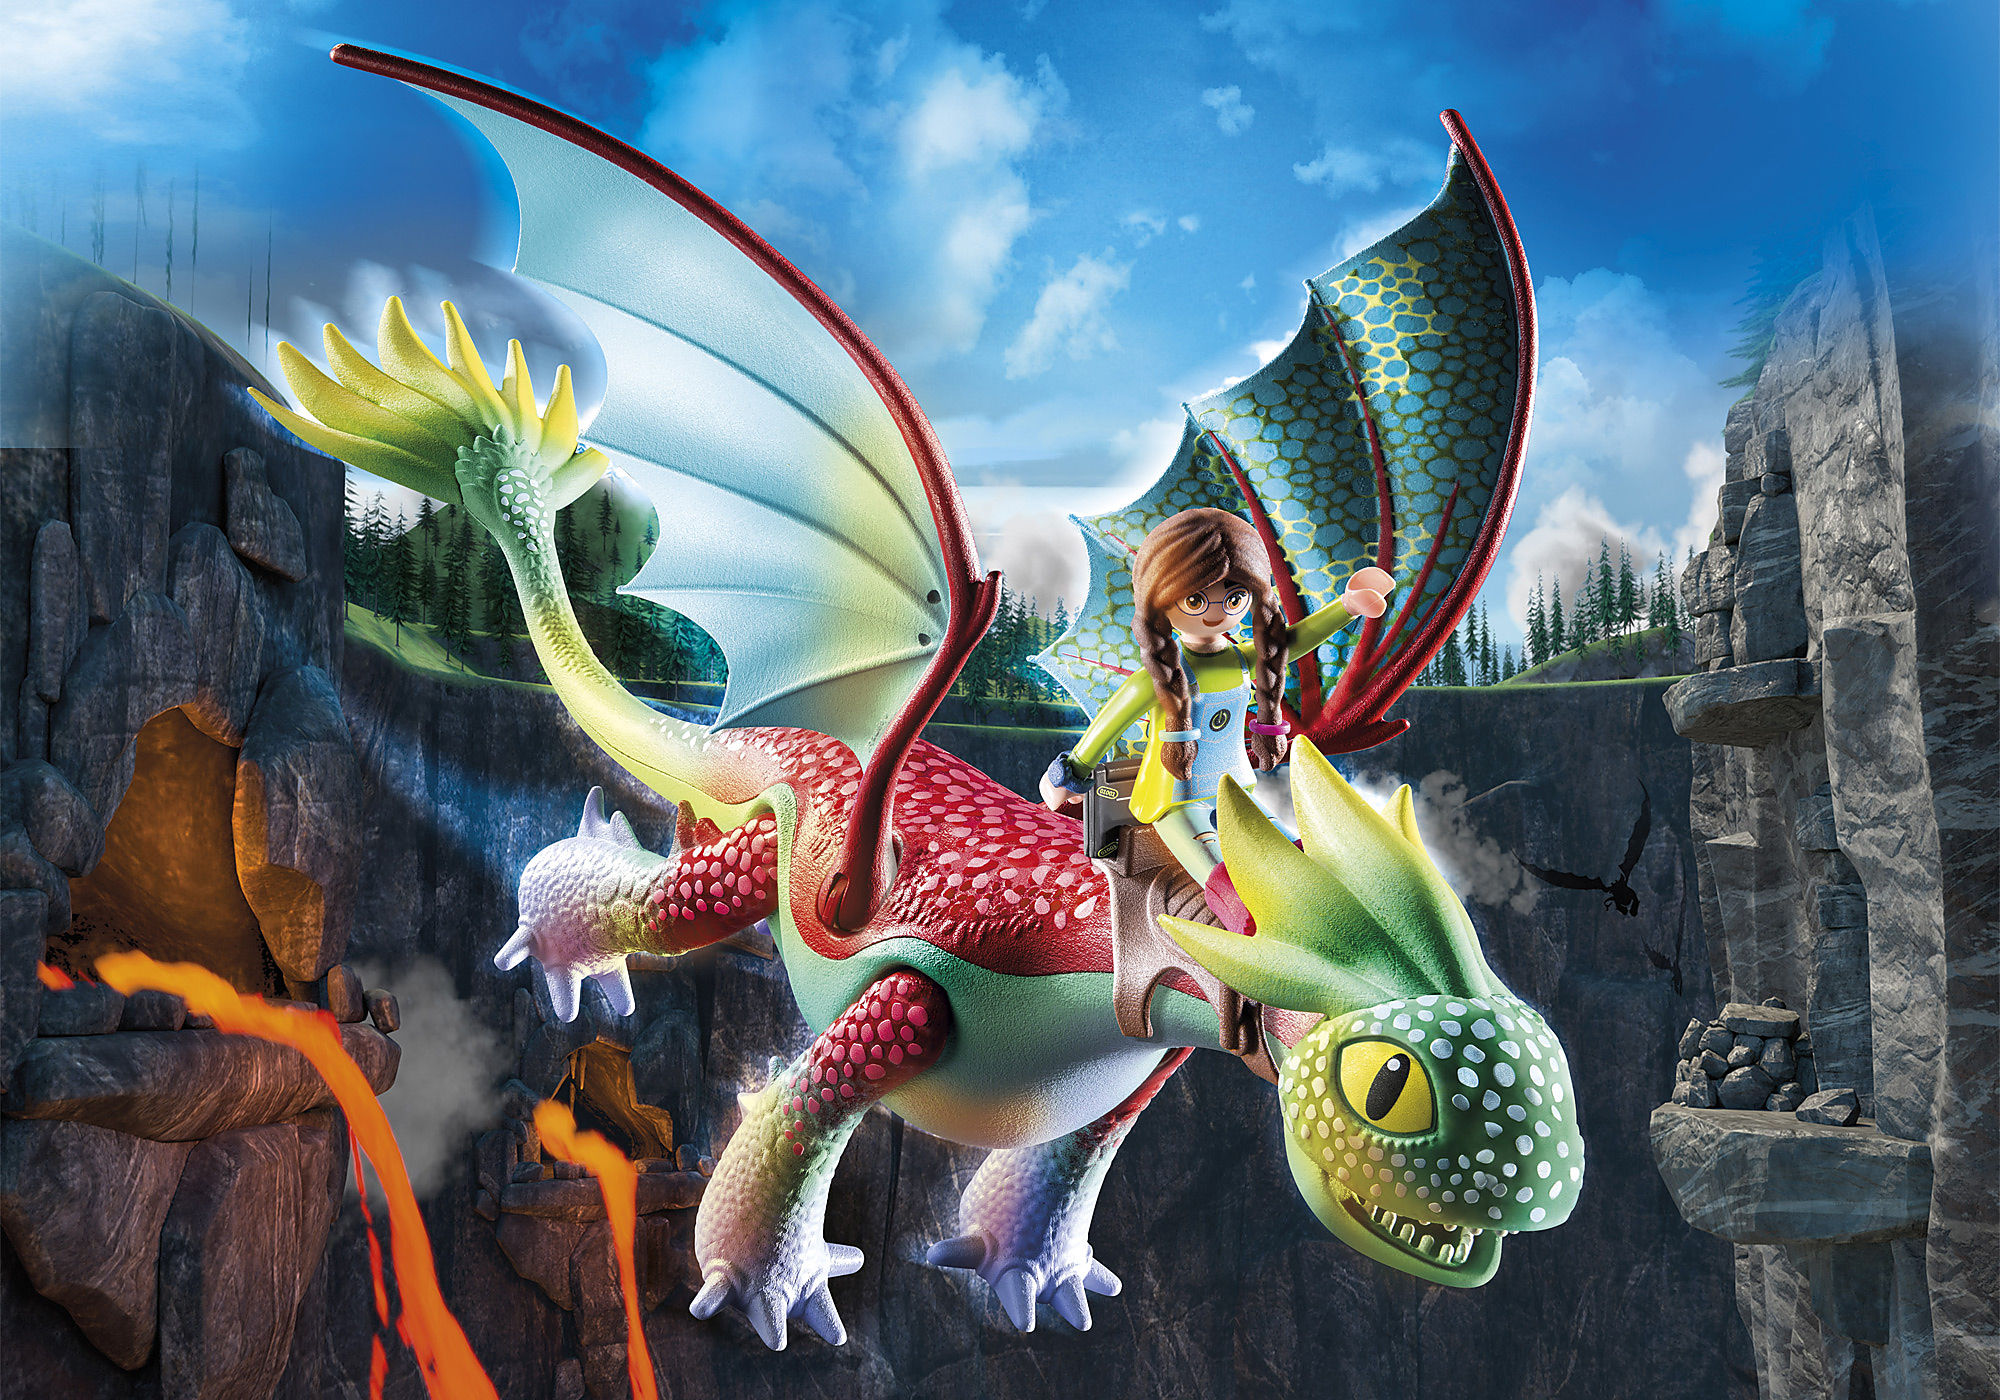 PLAYMOBIL Dragons: The Nine Realms GIVEAWAY!